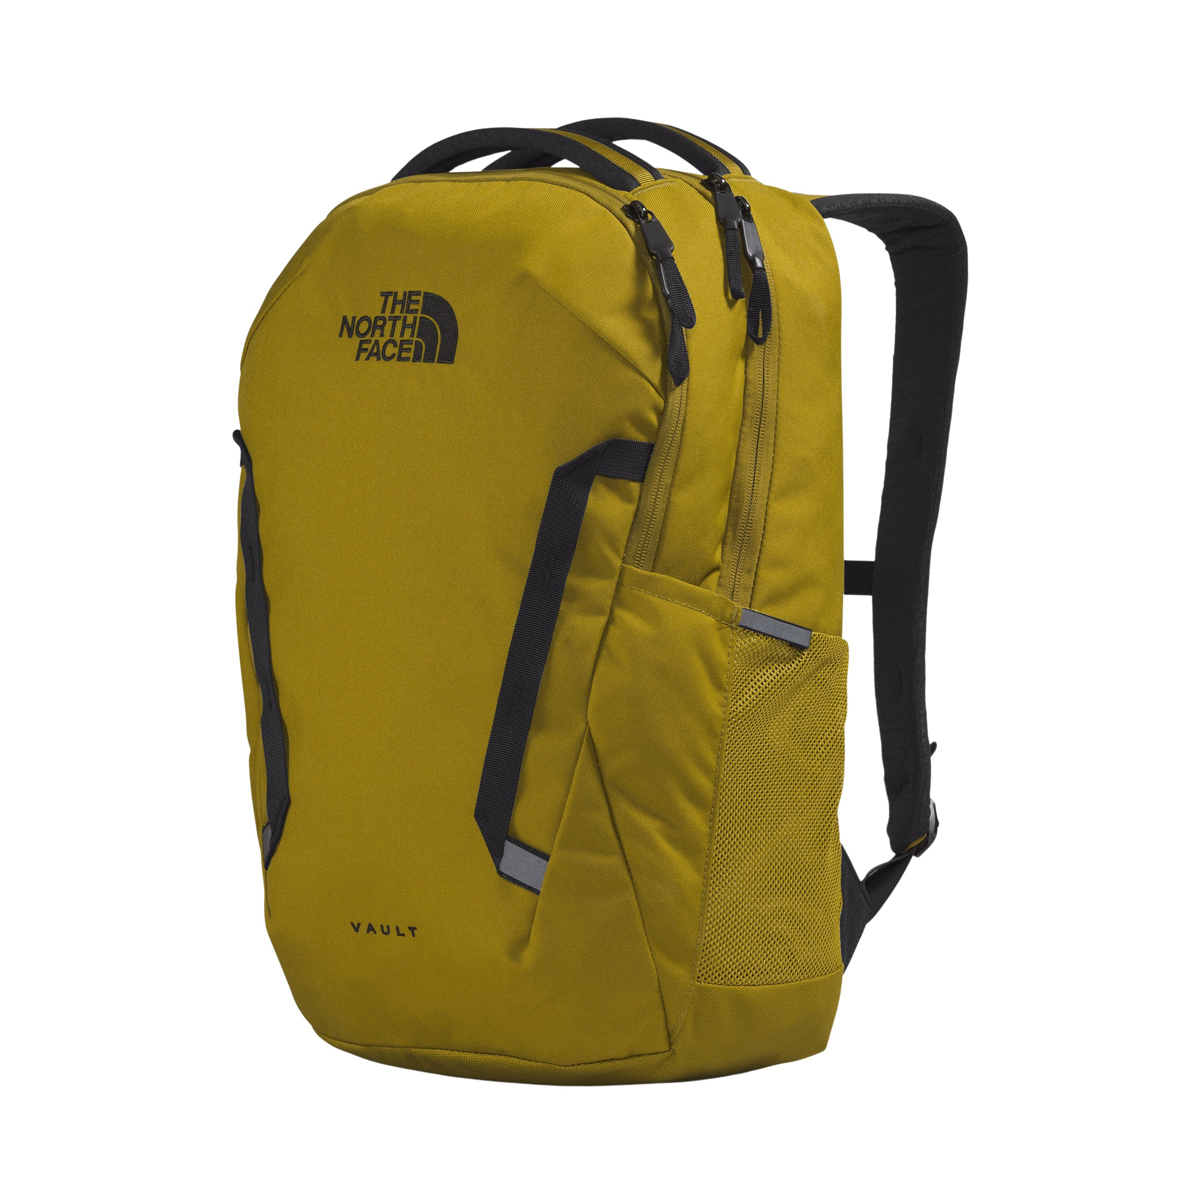 Men's Vault Backpack - The North Face | Latulippe